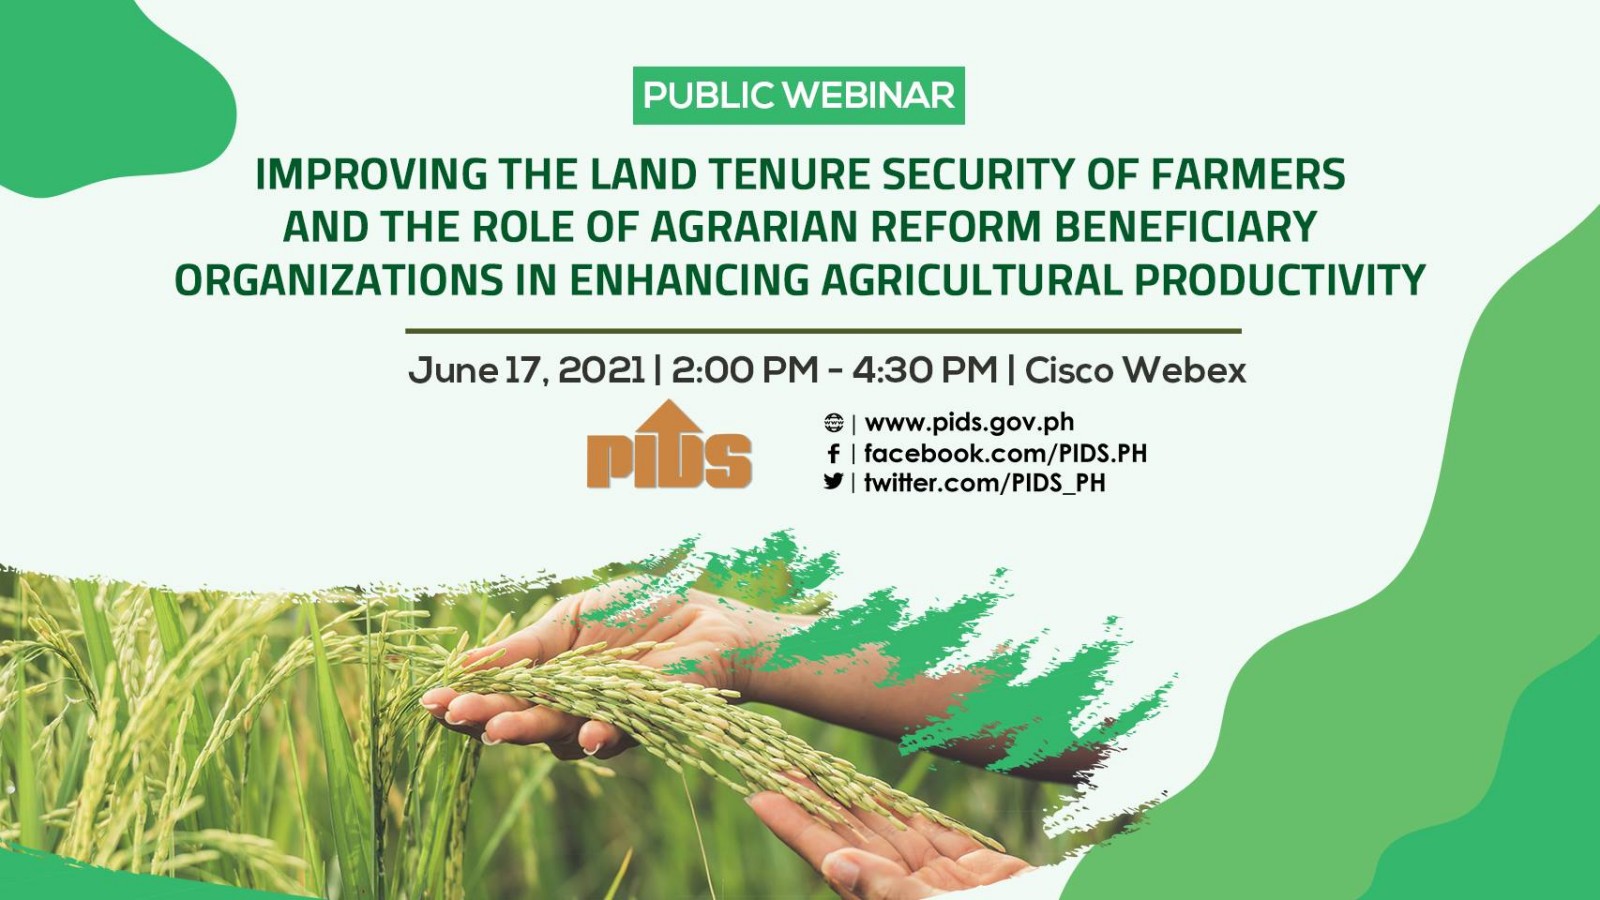 Improving the Land Tenure Security of Farmers and the Role of Agrarian Reform Beneficiary Organizations in Enhancing Agricultural Productivity (Available on Facebook Live)-backdrop_june_17_lowres2.jpg